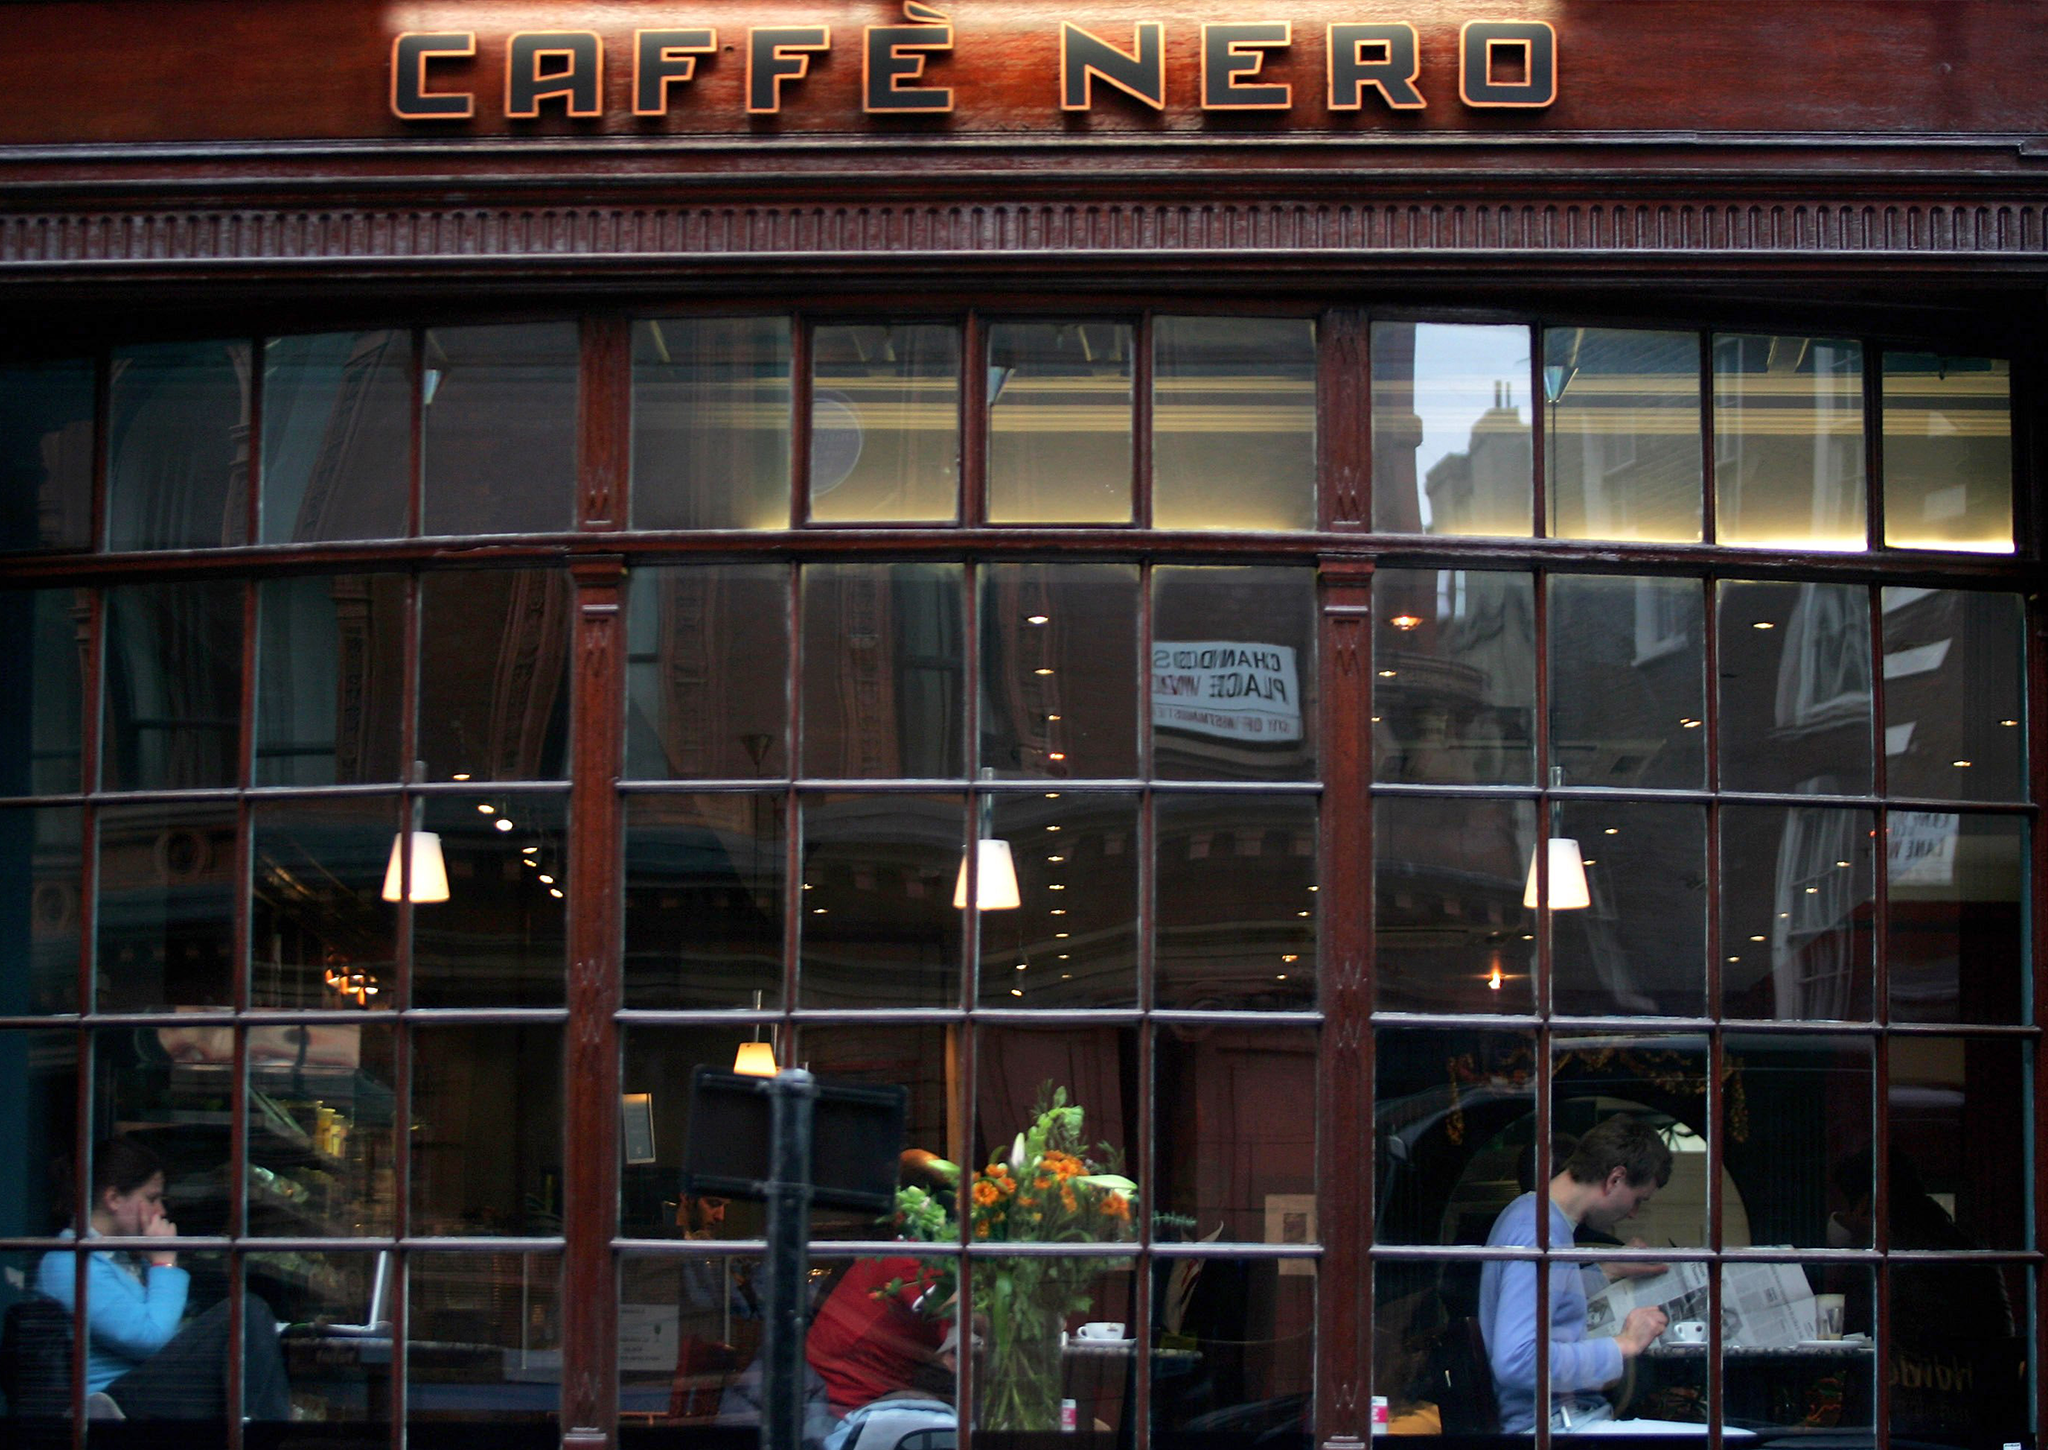 A Cafe Nero coffee store in central London